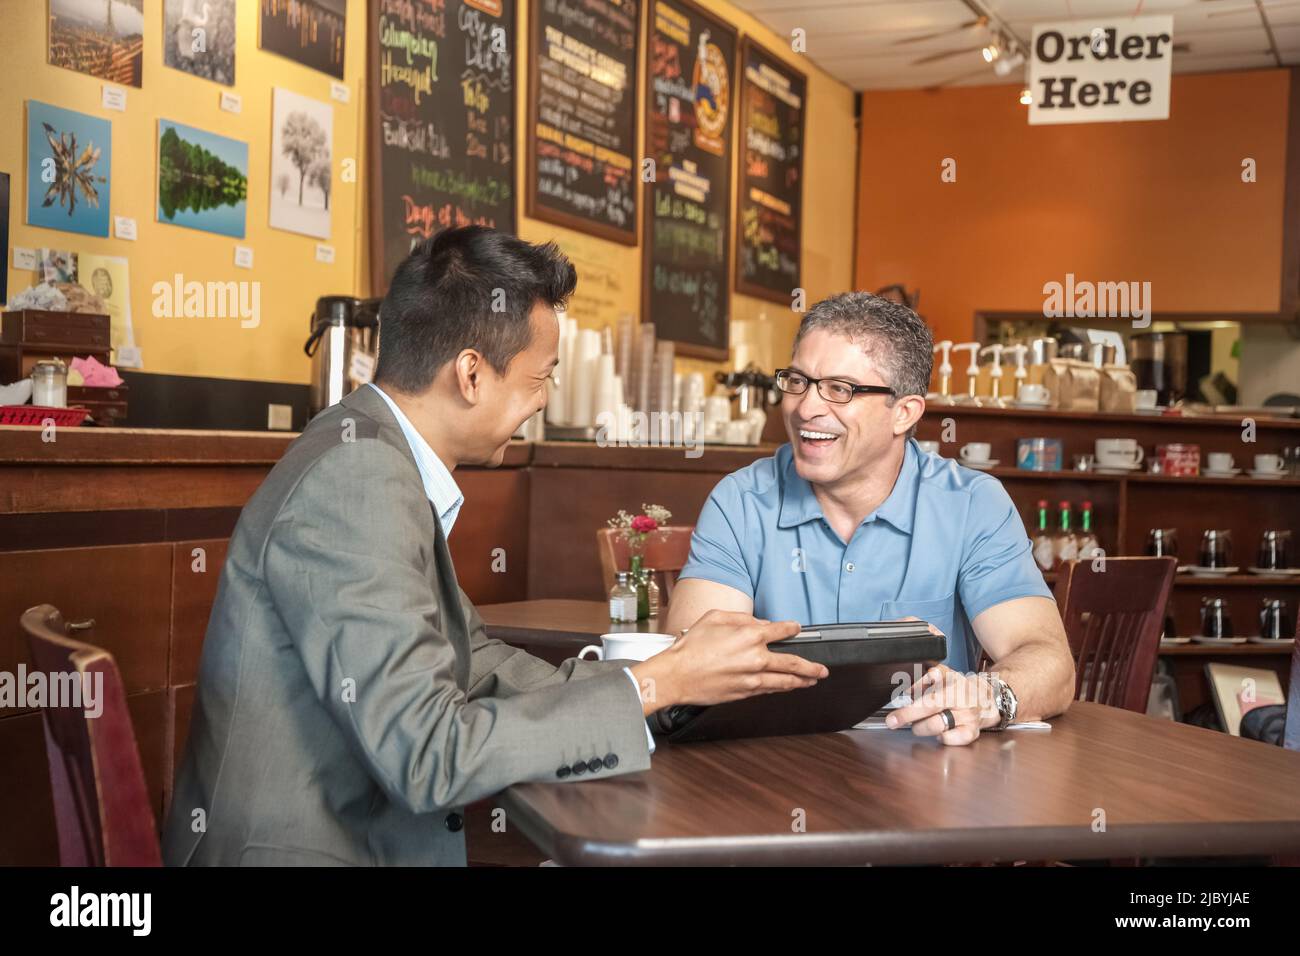 Salesman talking to owner in cafe Stock Photo